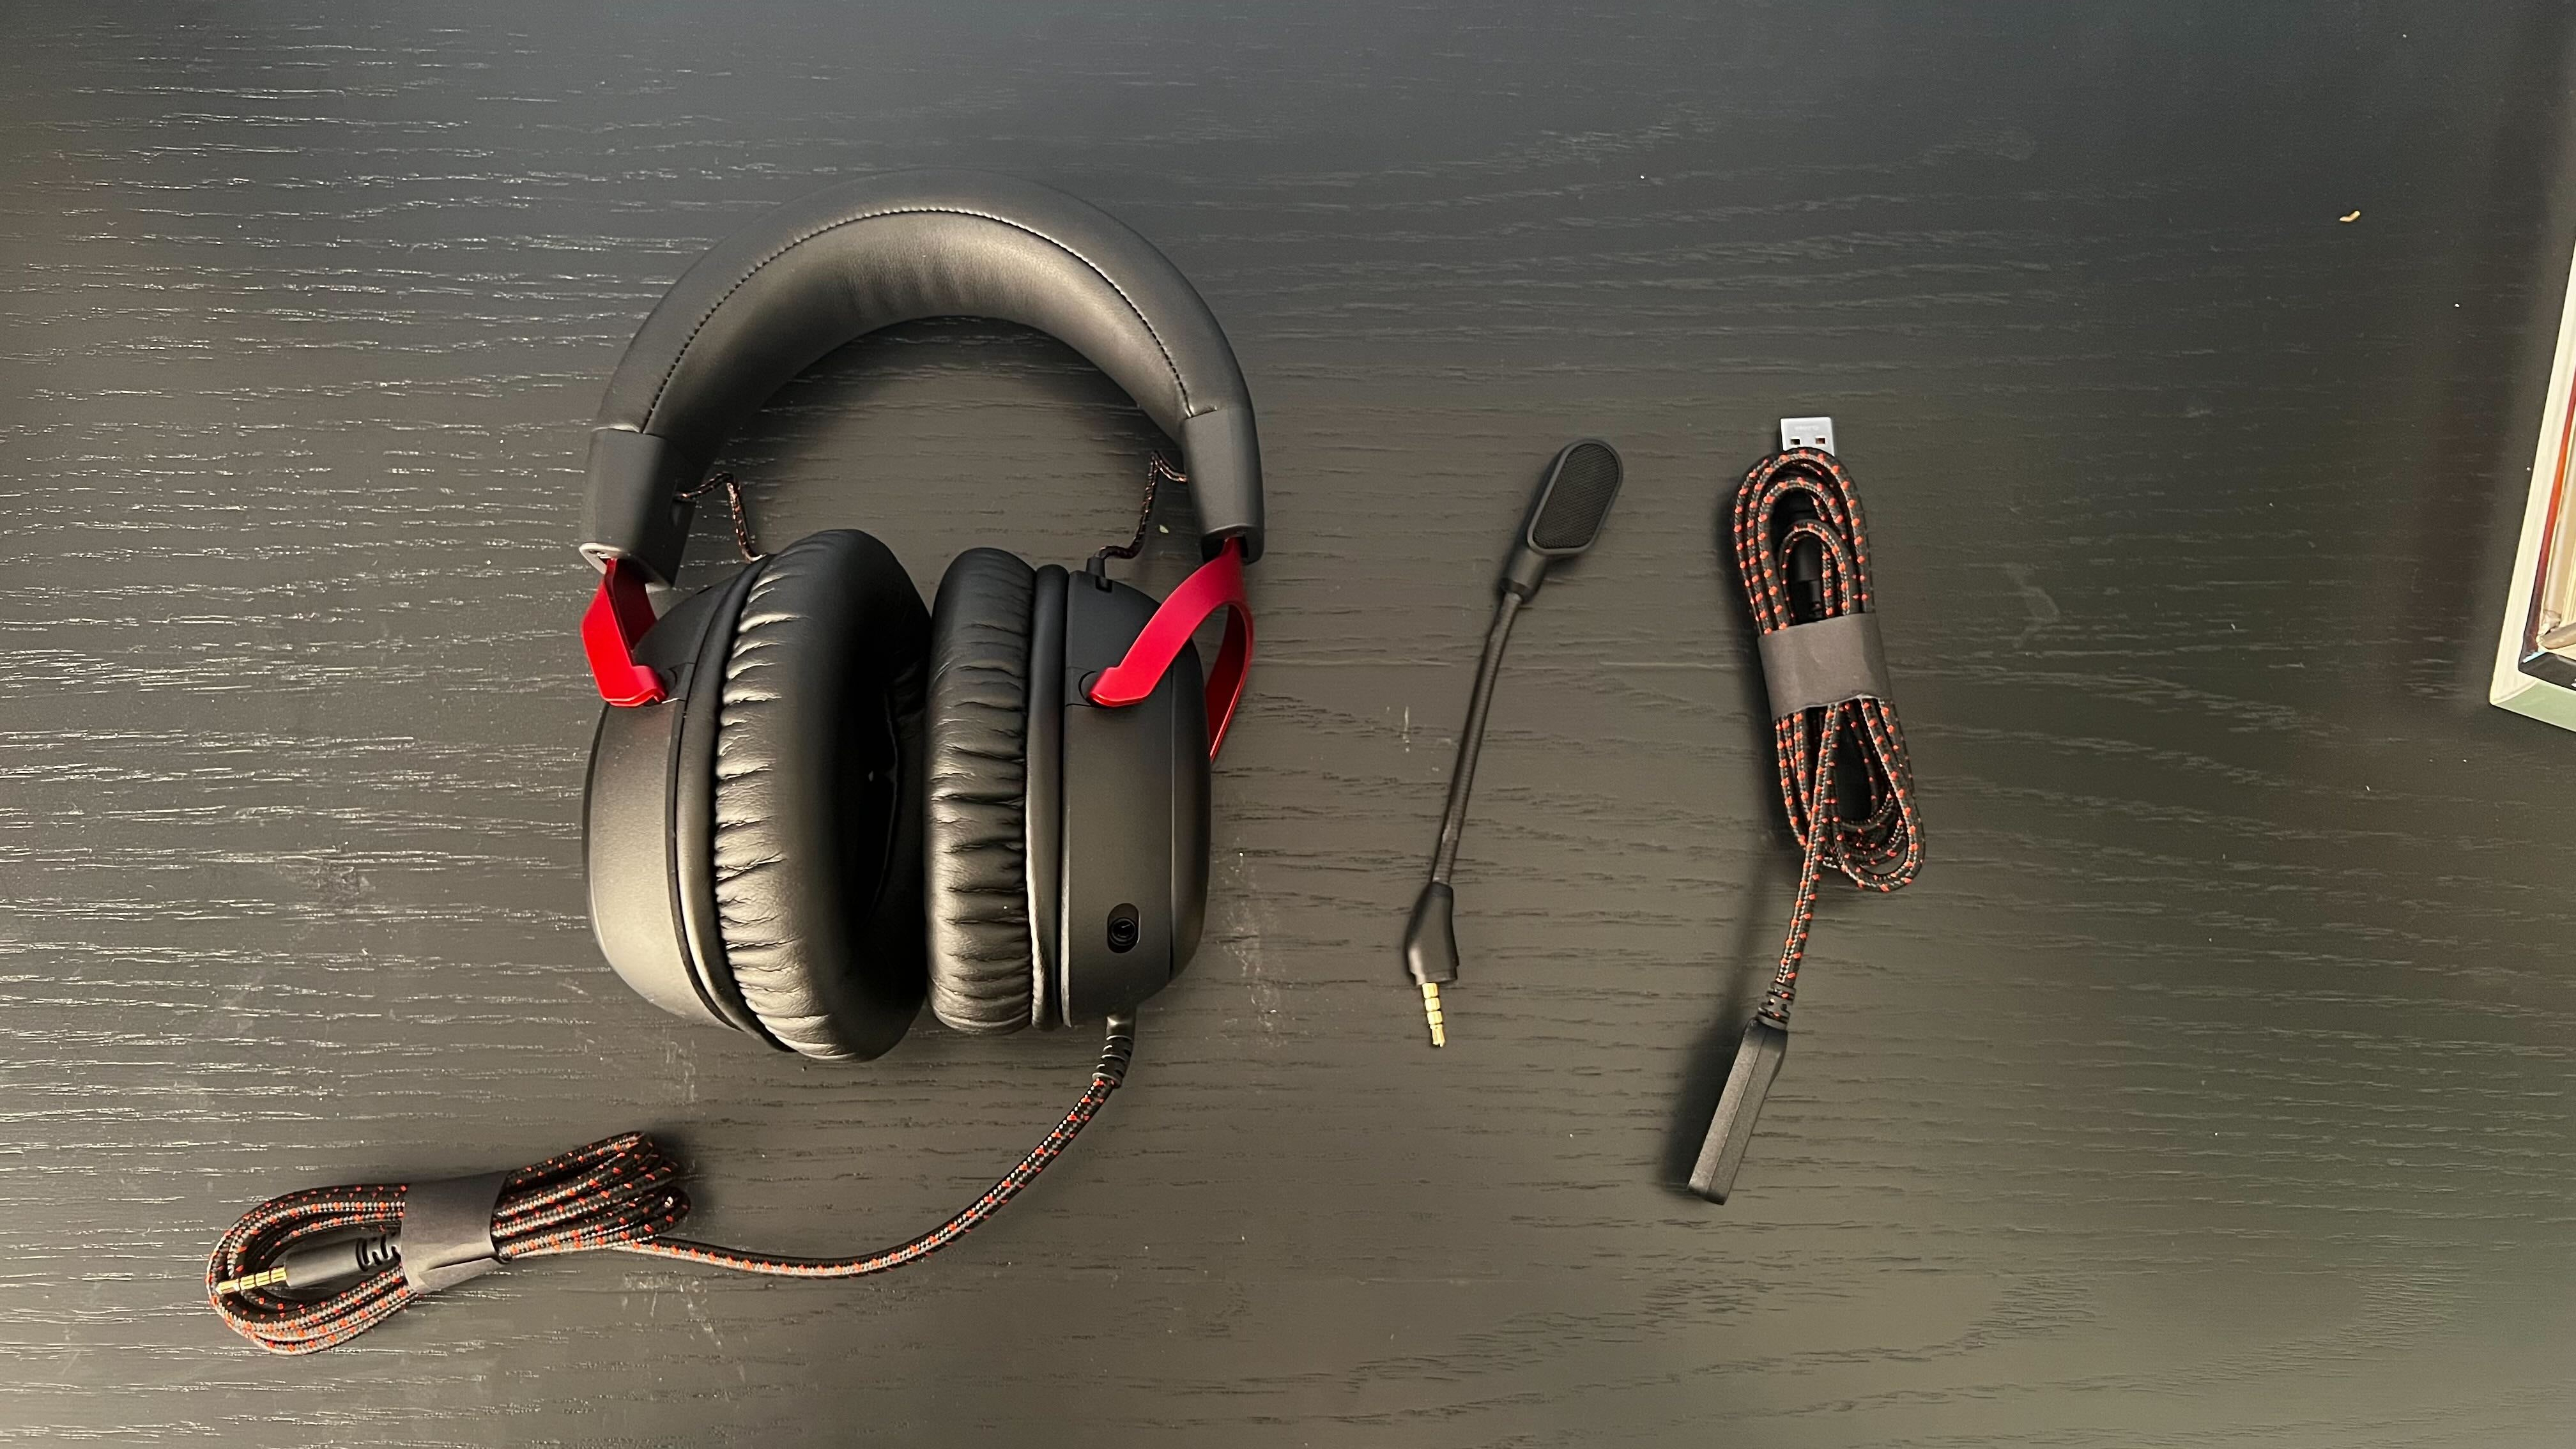 HyperX Cloud III and all its accecories.